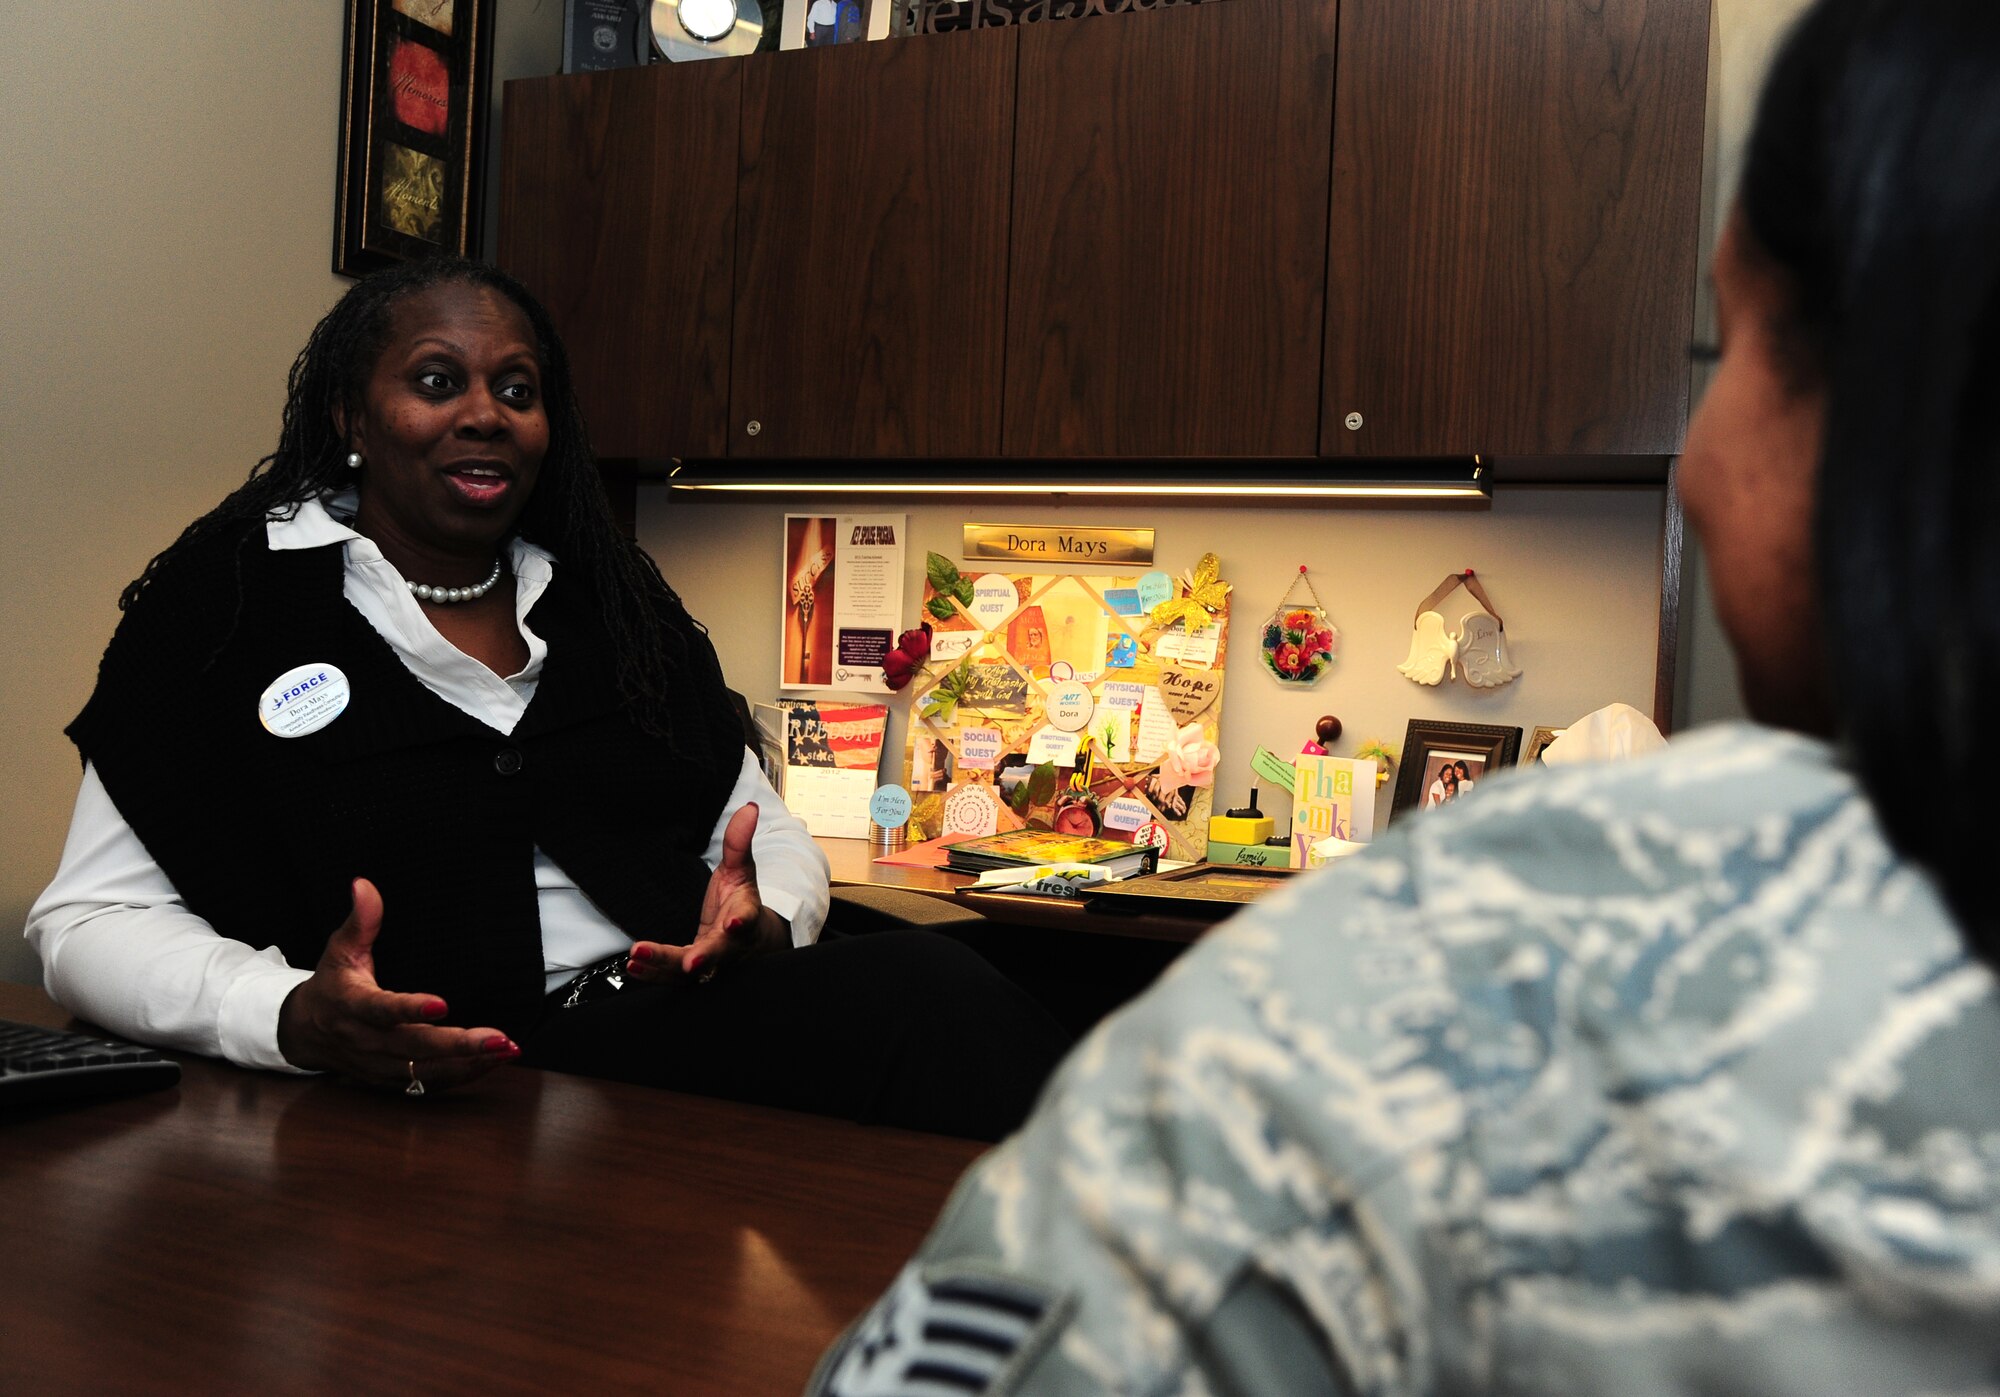 Dora Mays, a community readiness consultant from the Airman and Family Readiness Center, gives advice to an Airman, Feb. 16, 2012 at MacDill Air Force Base, Fla. The A&FRC offers many support services to MacDill’s military members and their families. (U.S.  Air Force photo by Airman Basic David Tracy)